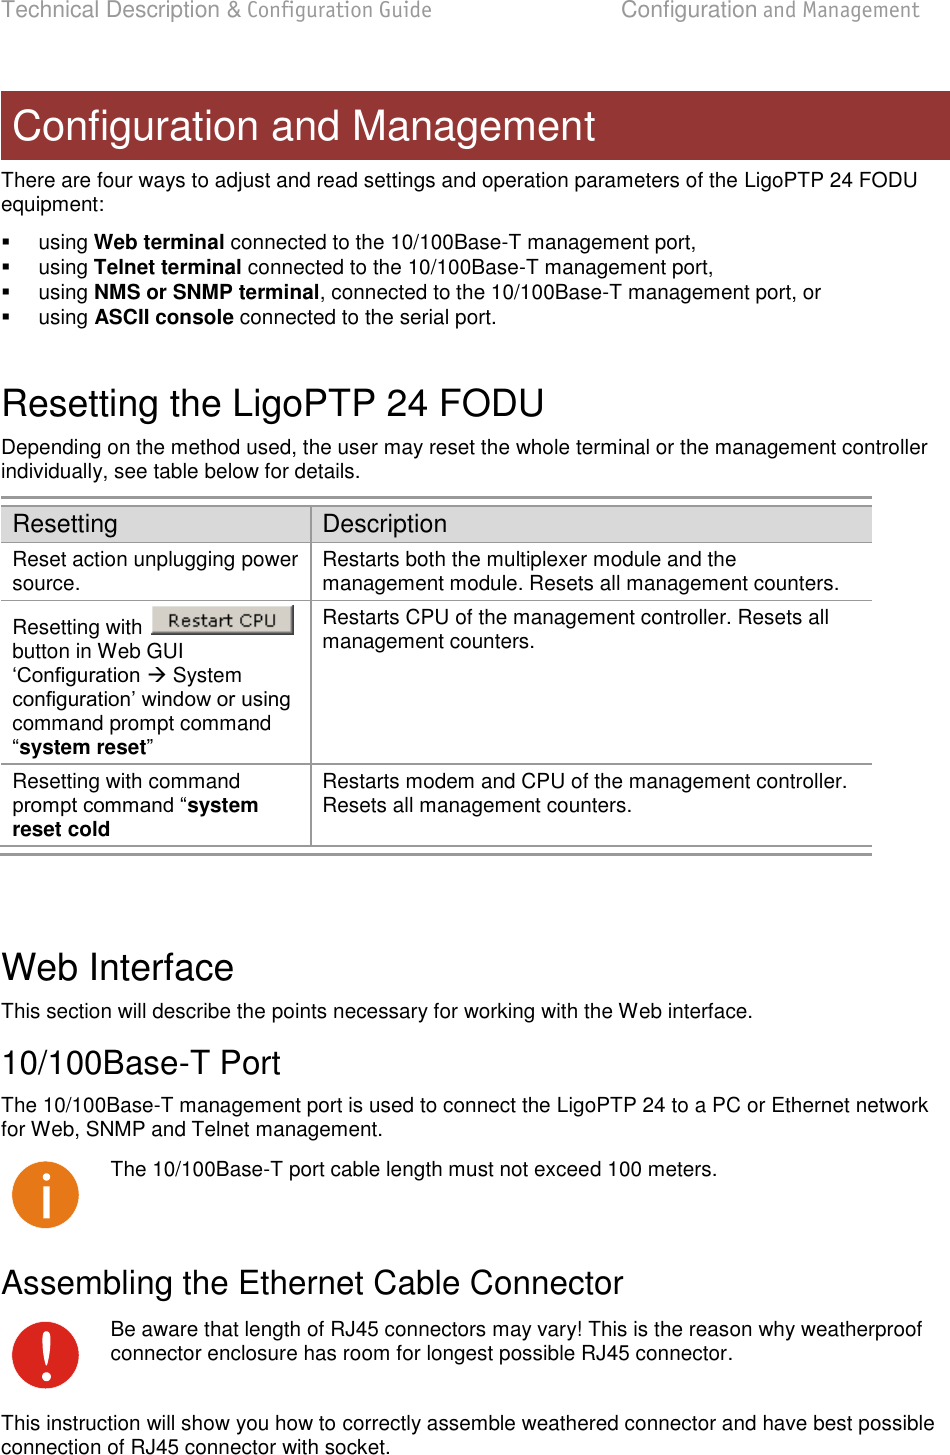 Technical Description &amp; Configuration Guide  Configuration and Management  LigoWave  Page 14 There are four ways to adjust and read settings and operation parameters of the LigoPTP 24 FODU equipment:    using Web terminal connected to the 10/100Base-T management port,   using Telnet terminal connected to the 10/100Base-T management port,   using NMS or SNMP terminal, connected to the 10/100Base-T management port, or   using ASCII console connected to the serial port.  Resetting the LigoPTP 24 FODU  Depending on the method used, the user may reset the whole terminal or the management controller individually, see table below for details.  Resetting Description Reset action unplugging power source.  Restarts both the multiplexer module and the management module. Resets all management counters.  Resetting with   button in Web GUI  System command prompt command system reset Restarts CPU of the management controller. Resets all management counters. Resetting with command system reset cold Restarts modem and CPU of the management controller. Resets all management counters.   Web Interface  This section will describe the points necessary for working with the Web interface. 10/100Base-T Port  The 10/100Base-T management port is used to connect the LigoPTP 24 to a PC or Ethernet network for Web, SNMP and Telnet management.   The 10/100Base-T port cable length must not exceed 100 meters. Assembling the Ethernet Cable Connector  Be aware that length of RJ45 connectors may vary! This is the reason why weatherproof connector enclosure has room for longest possible RJ45 connector. This instruction will show you how to correctly assemble weathered connector and have best possible connection of RJ45 connector with socket. Configuration and Management 